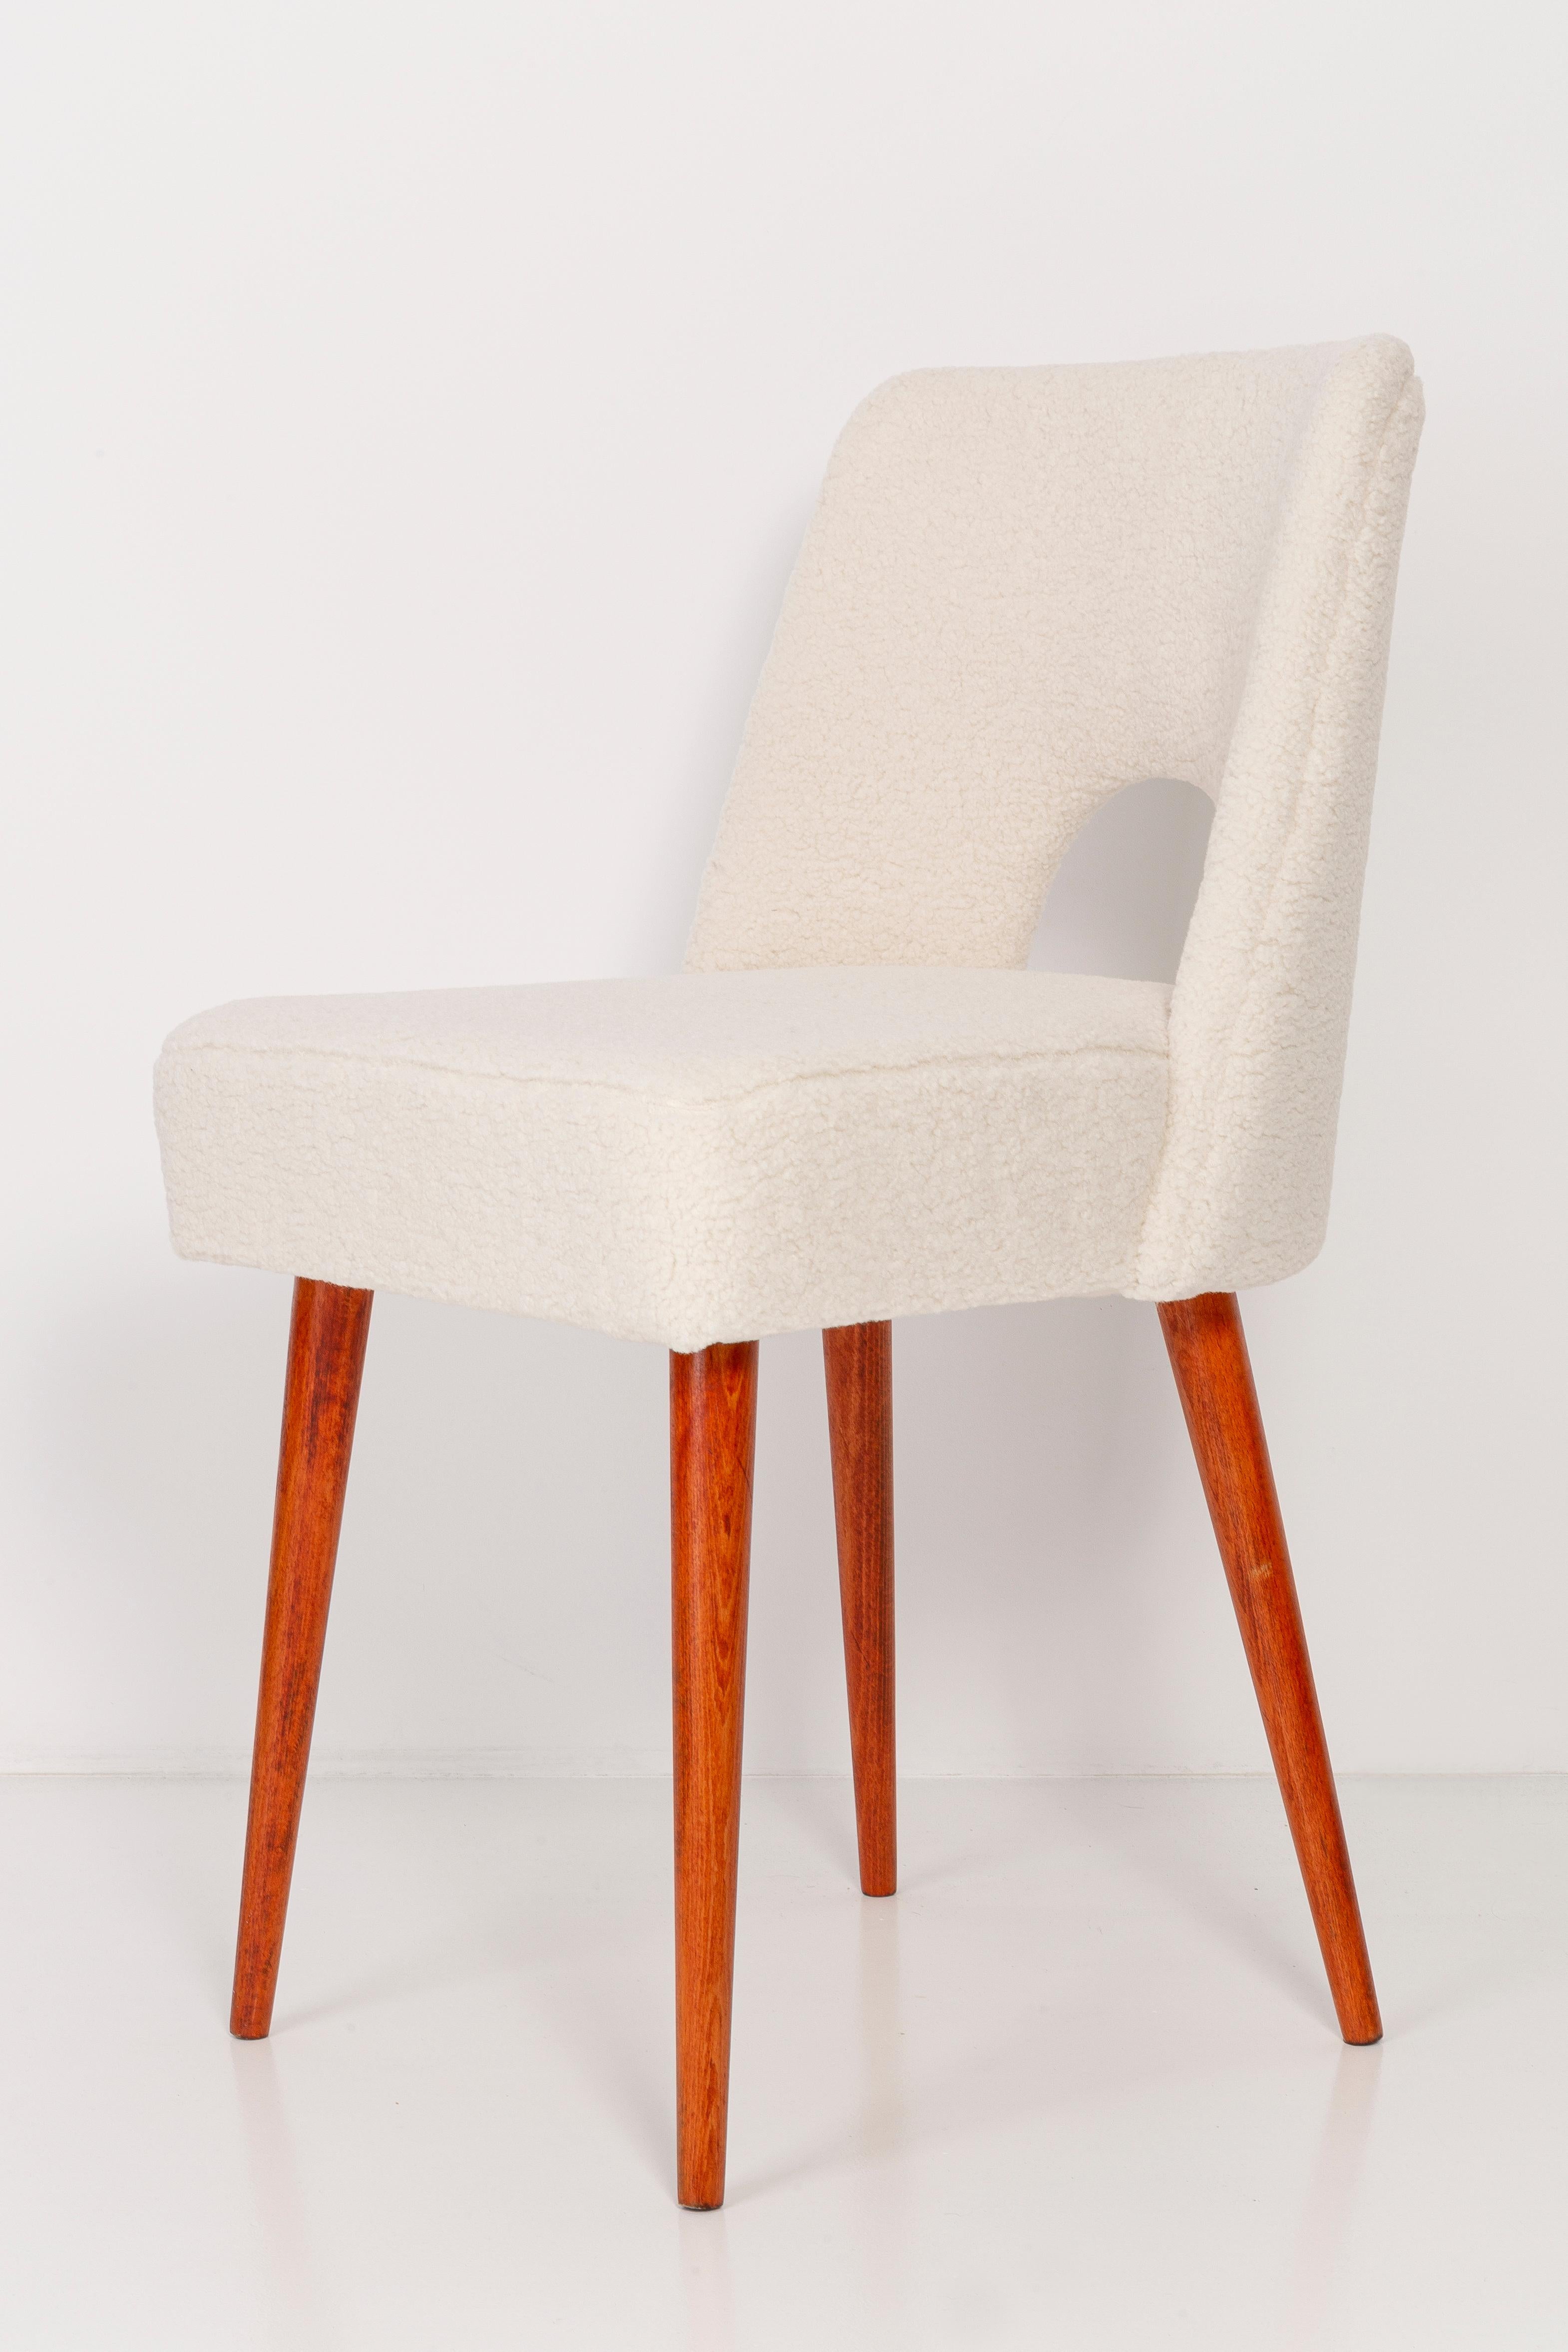 Hand-Crafted Set of Ten Light Crème Boucle 'Shell' Chairs, 1960s For Sale